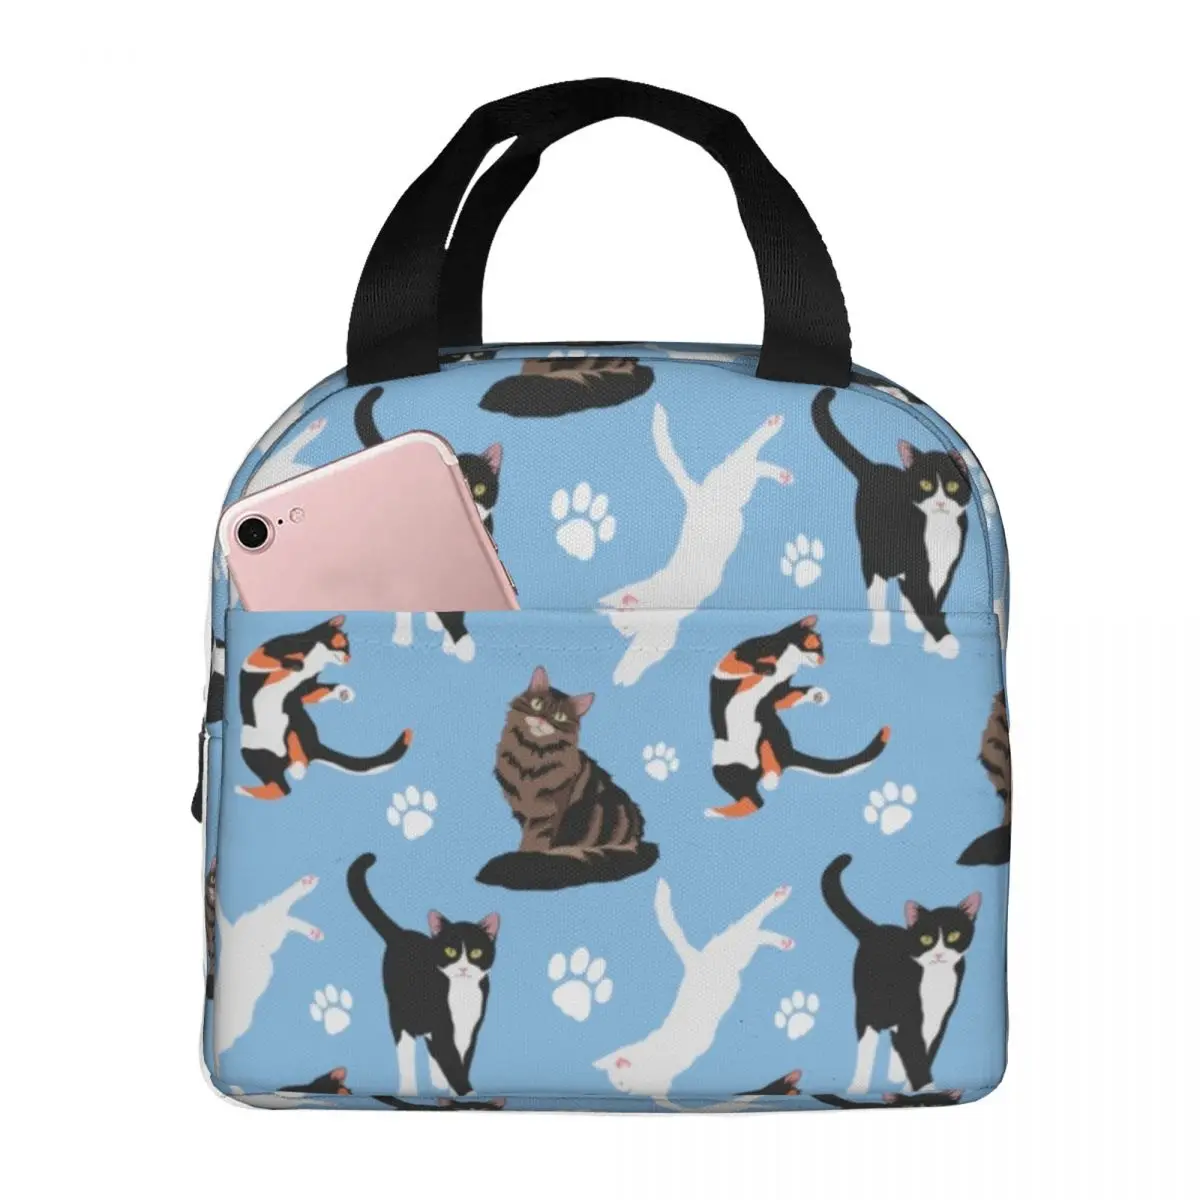 Cat Pattern Lunch Bags Portable Insulated Canvas Cooler Blue Thermal Food School Lunch Box for Women Girl